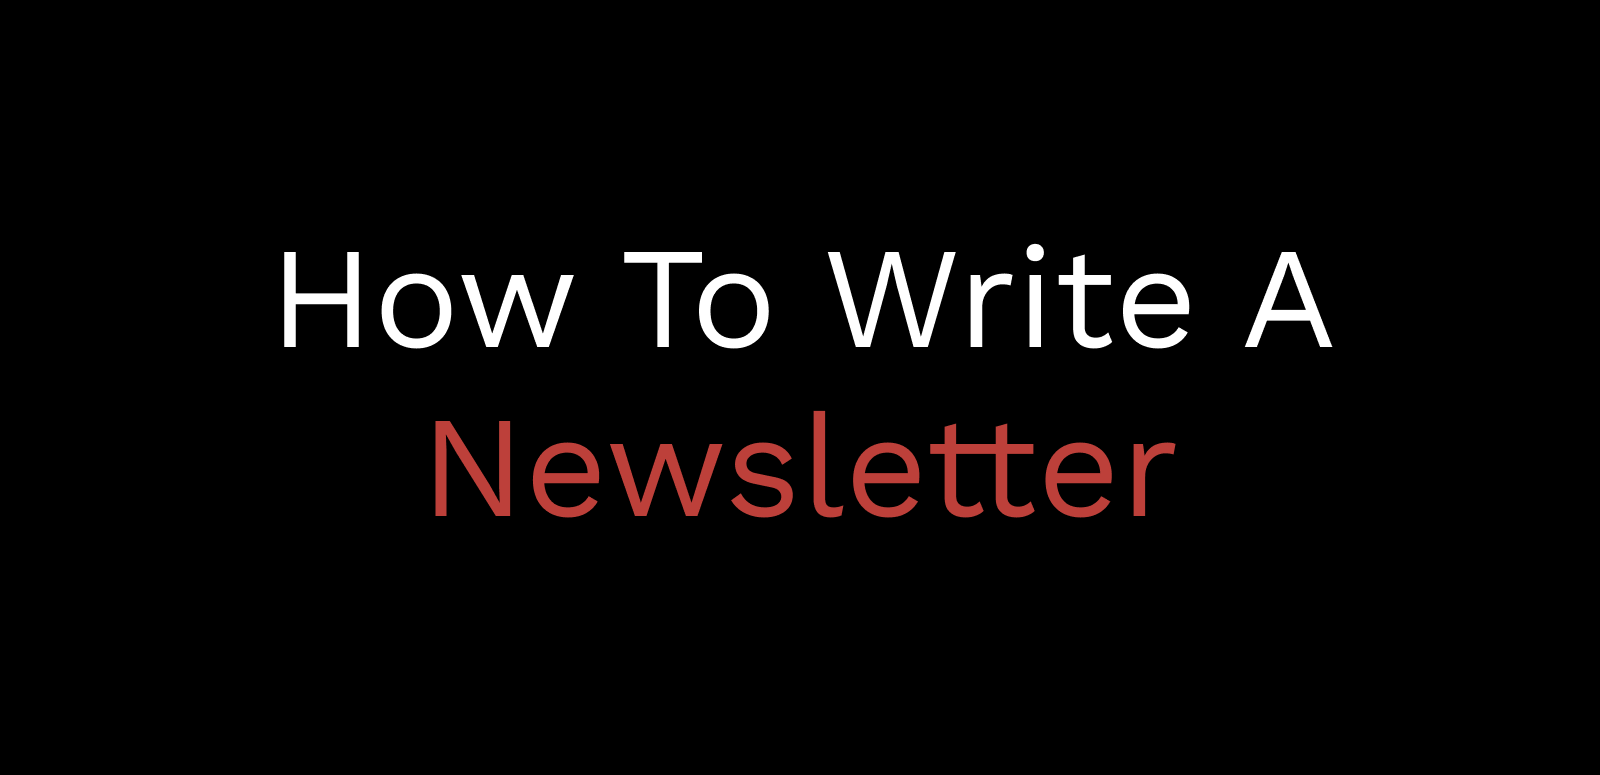 How to write a newsletter